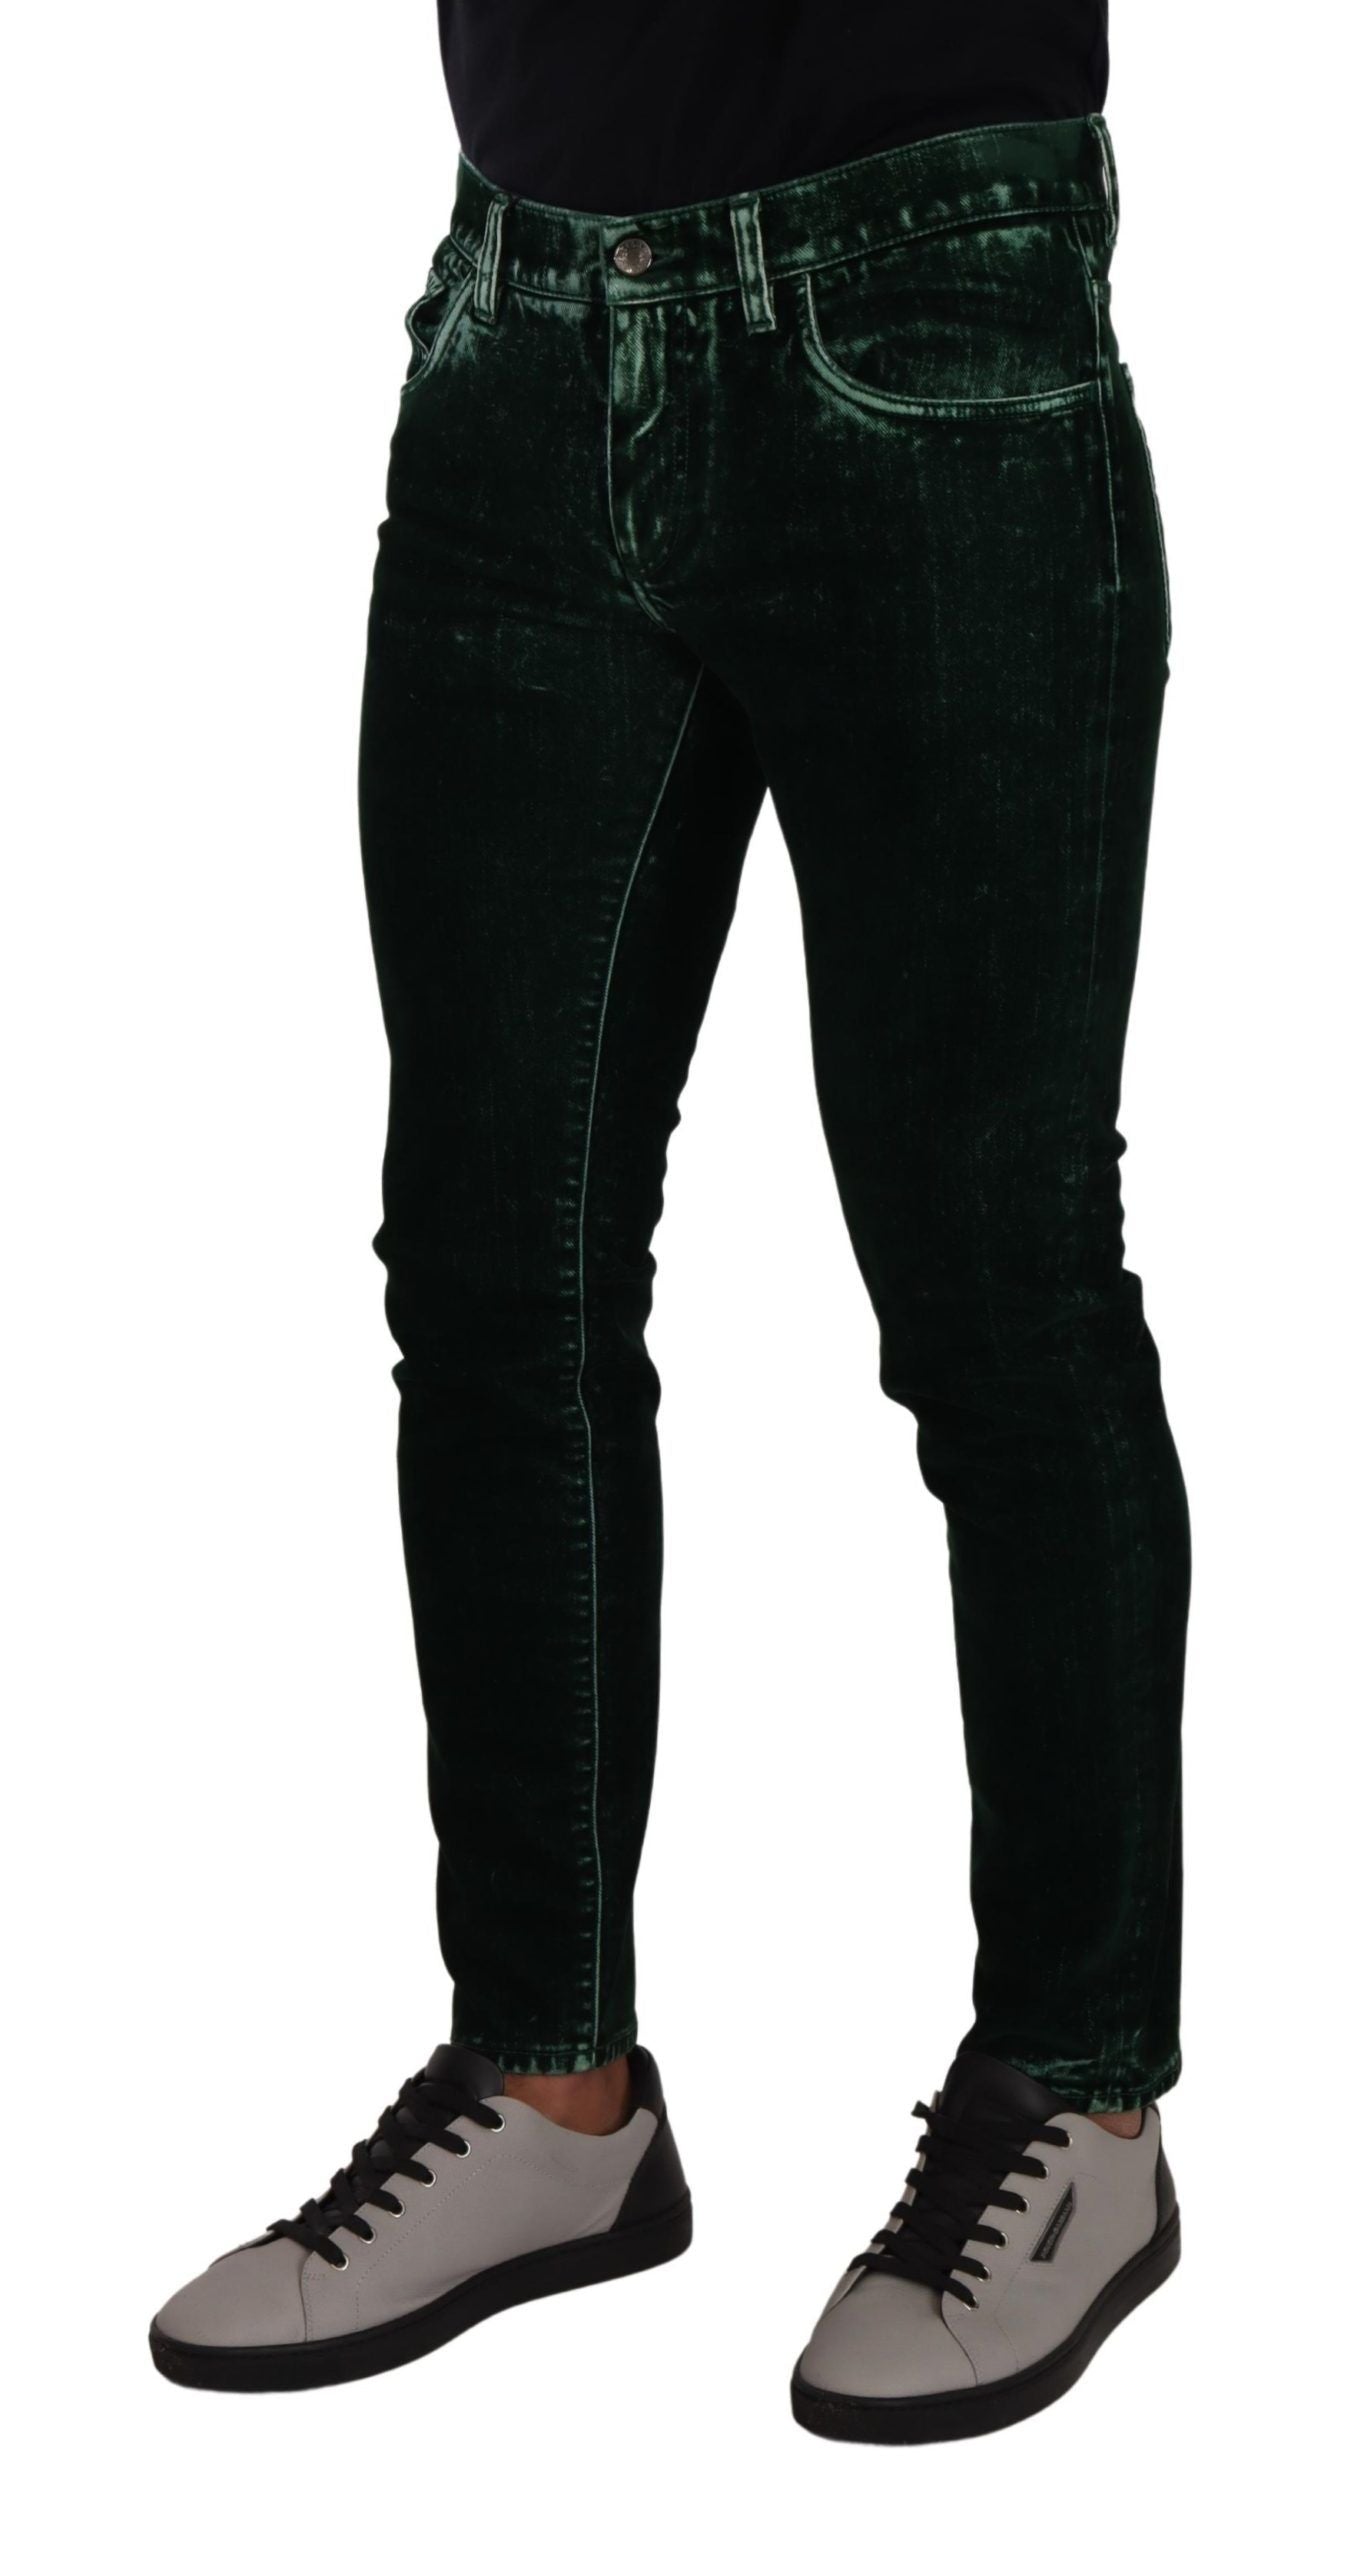 Dolce & Gabbana Green Cotton Stretch Skinny Slim Fit Jeans - Gio Beverly Hills